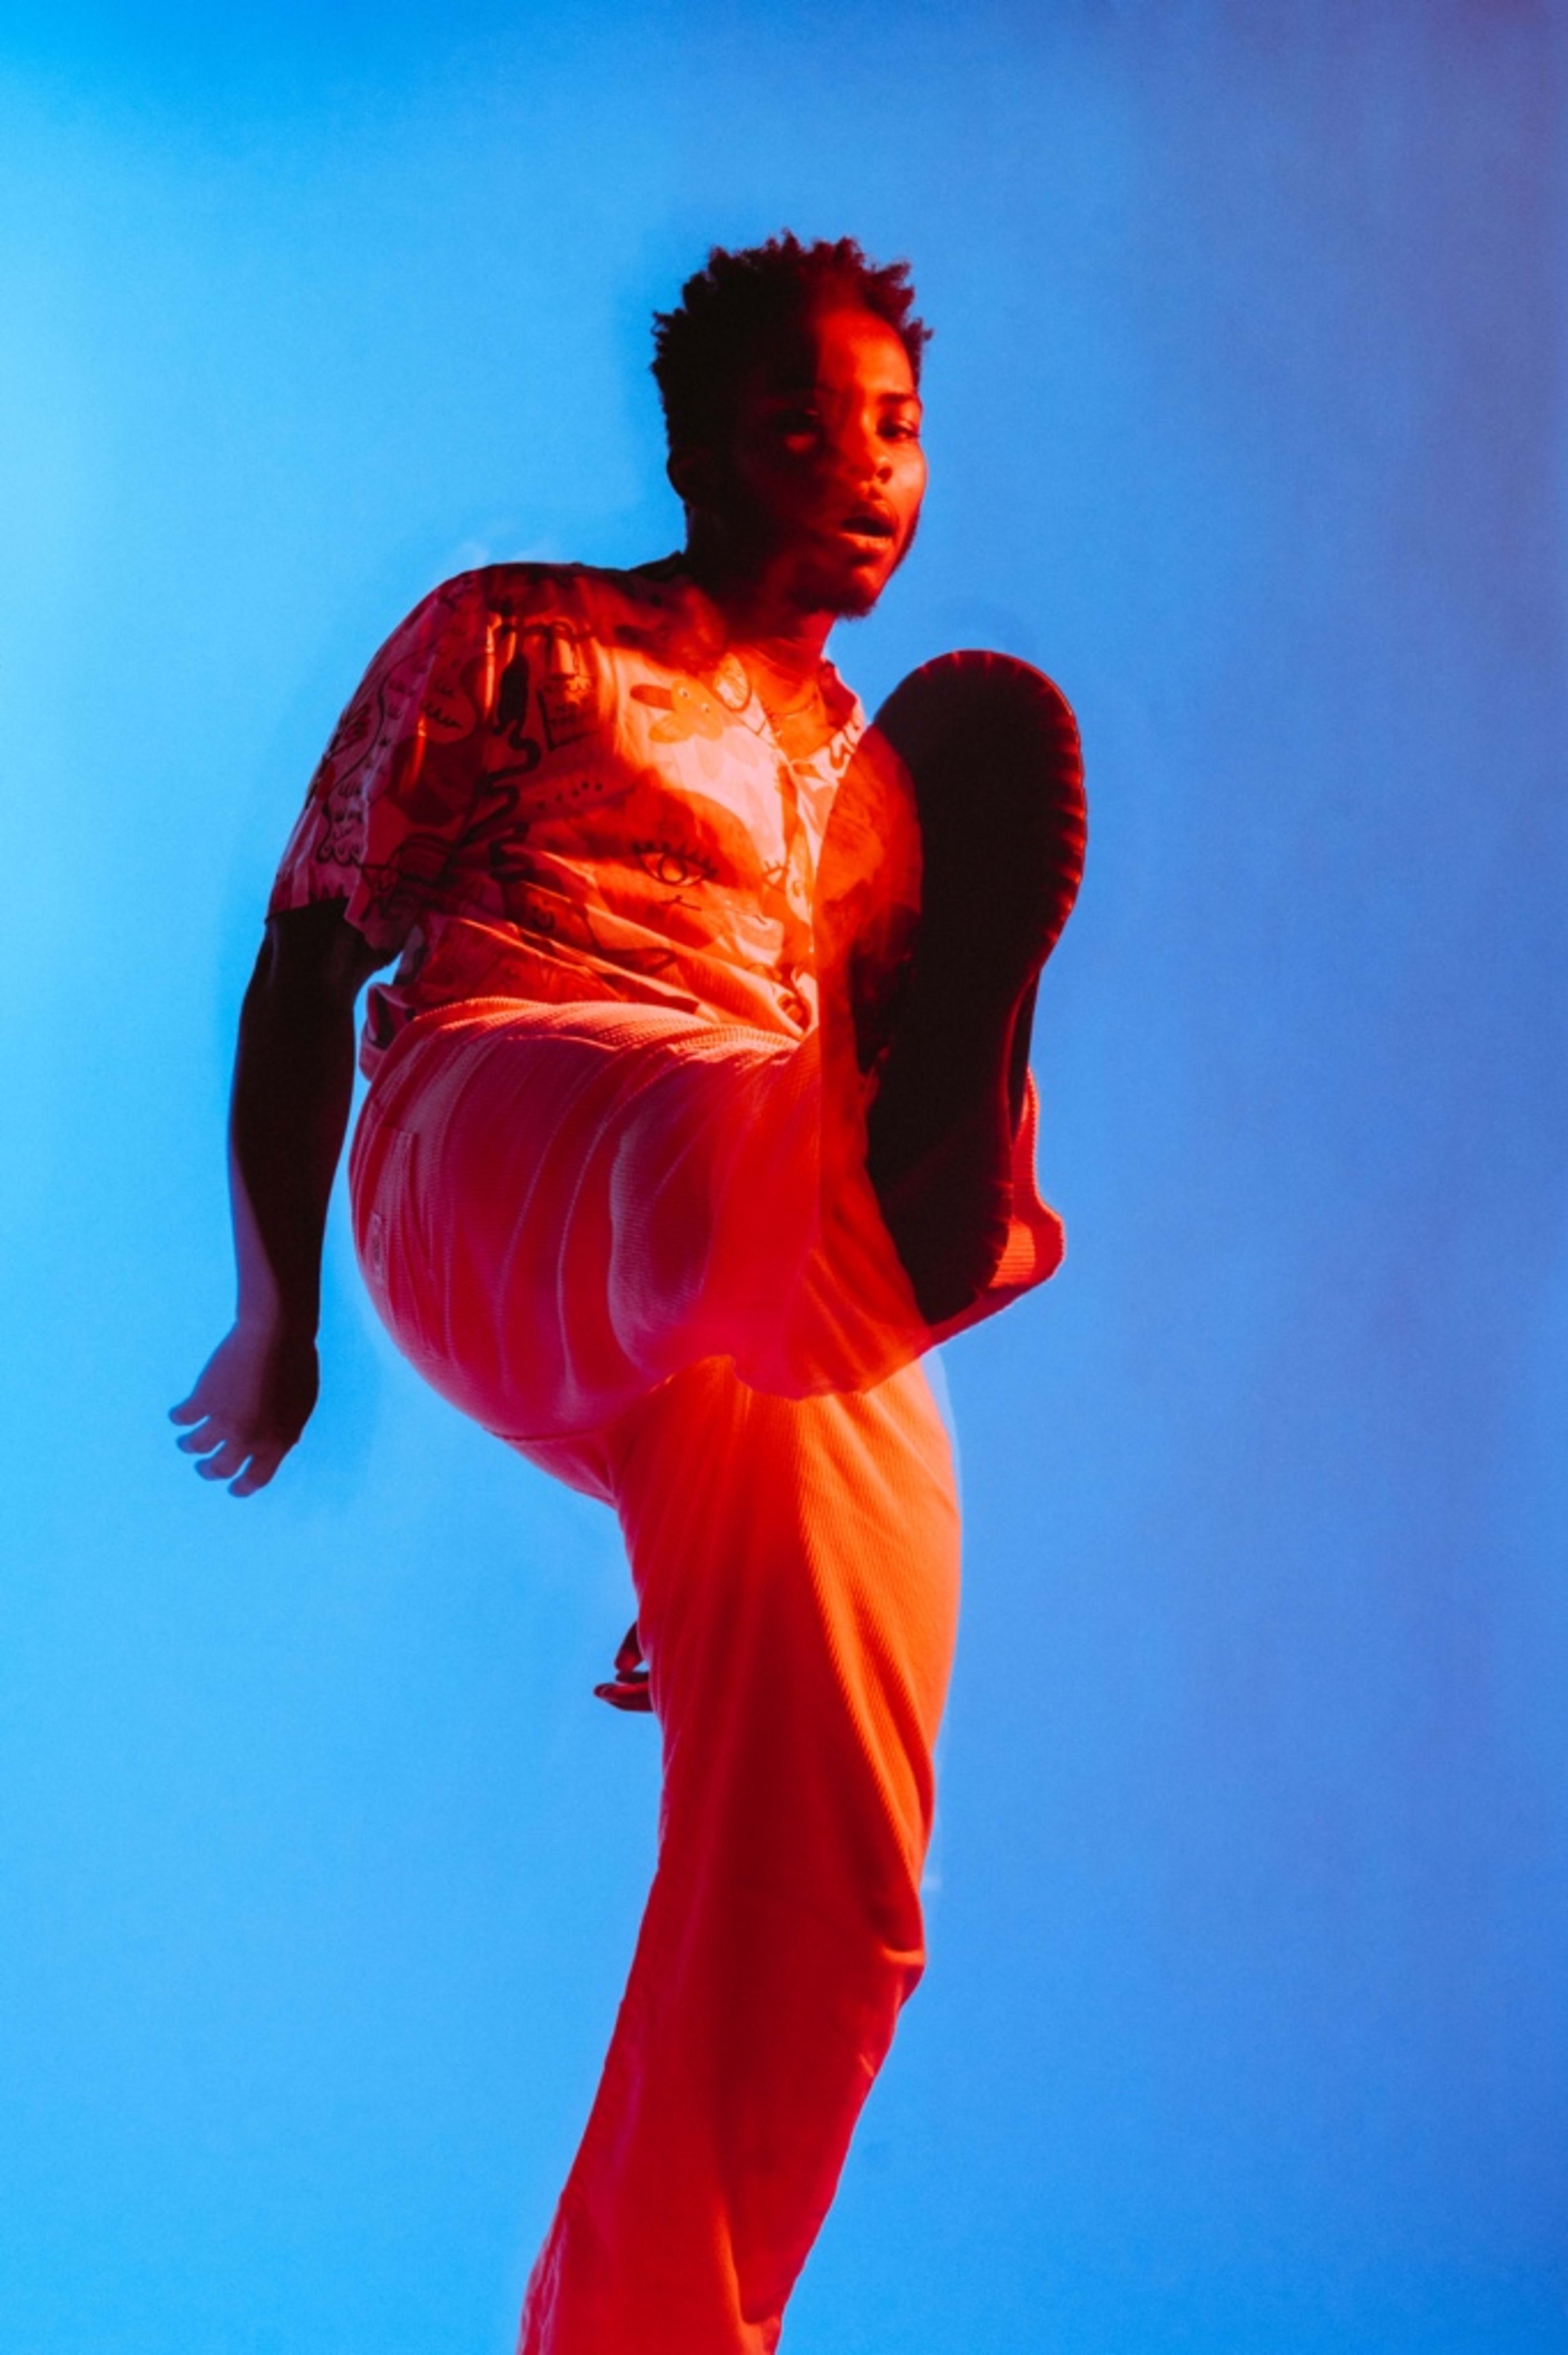 A person dressed in orange kicking during a photoshoot.